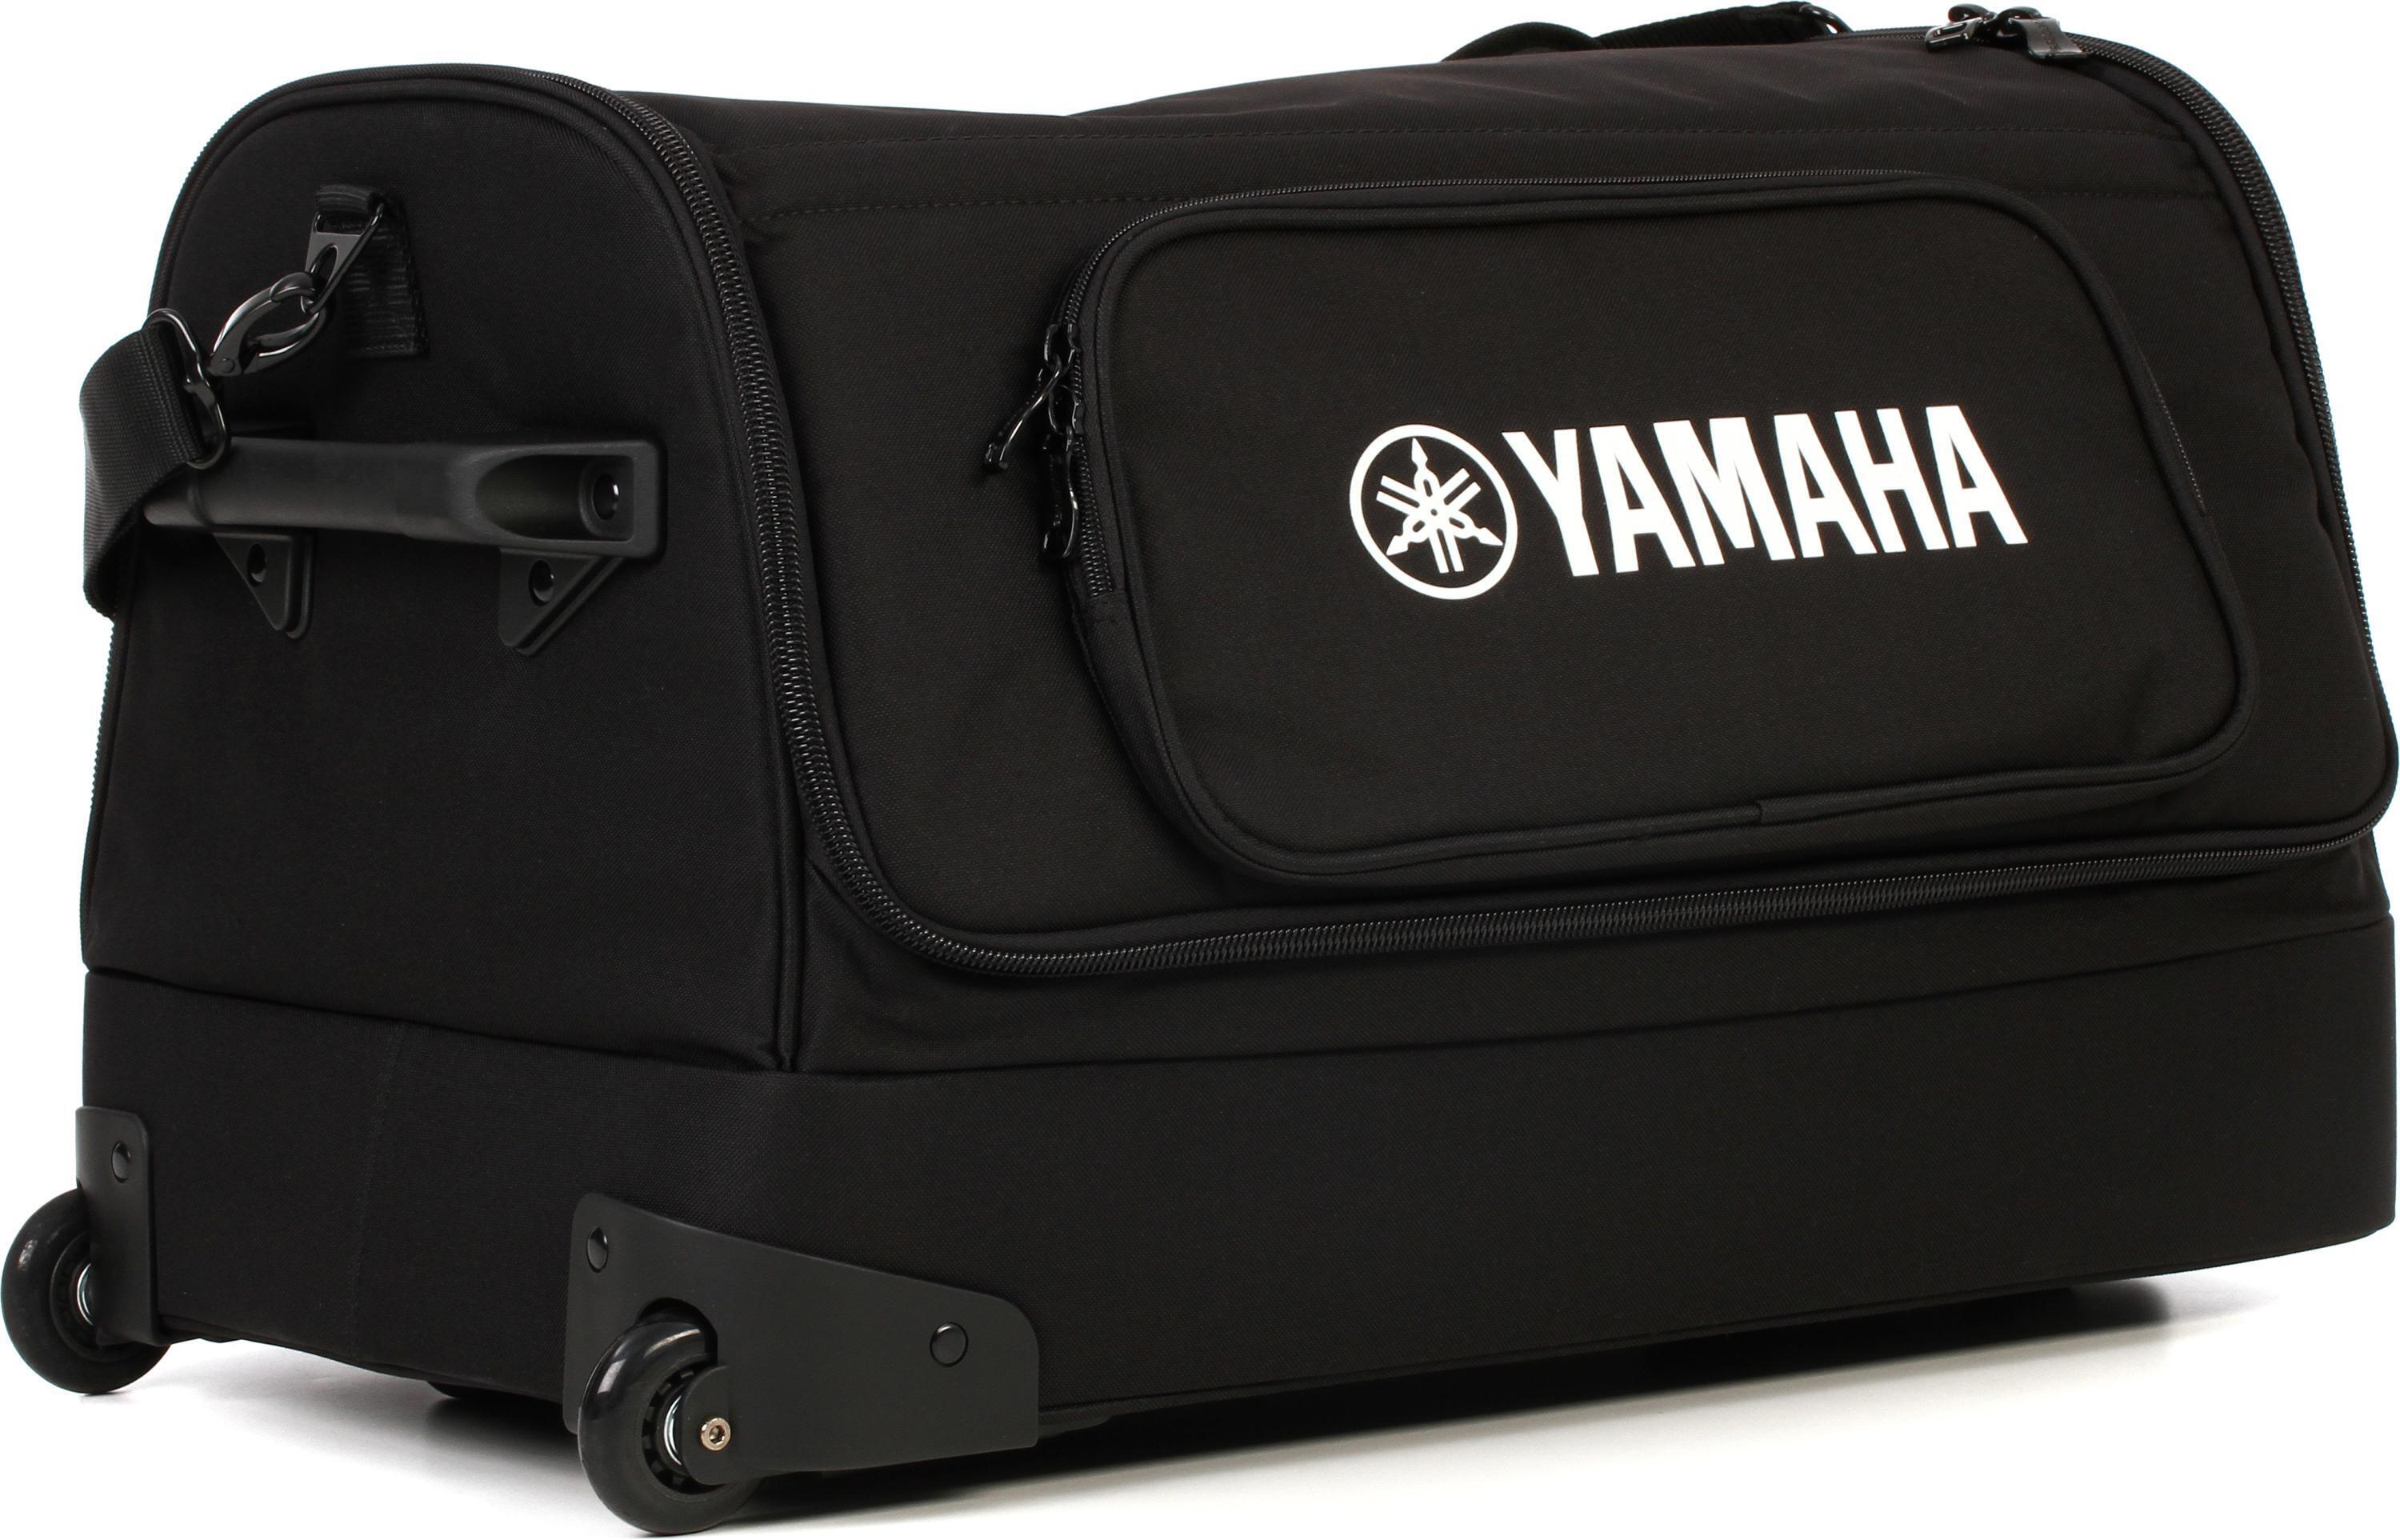 Yamaha Road Star Saddlebag Sideliners Side Case Trunk Liners Bags,Balck -  Pair